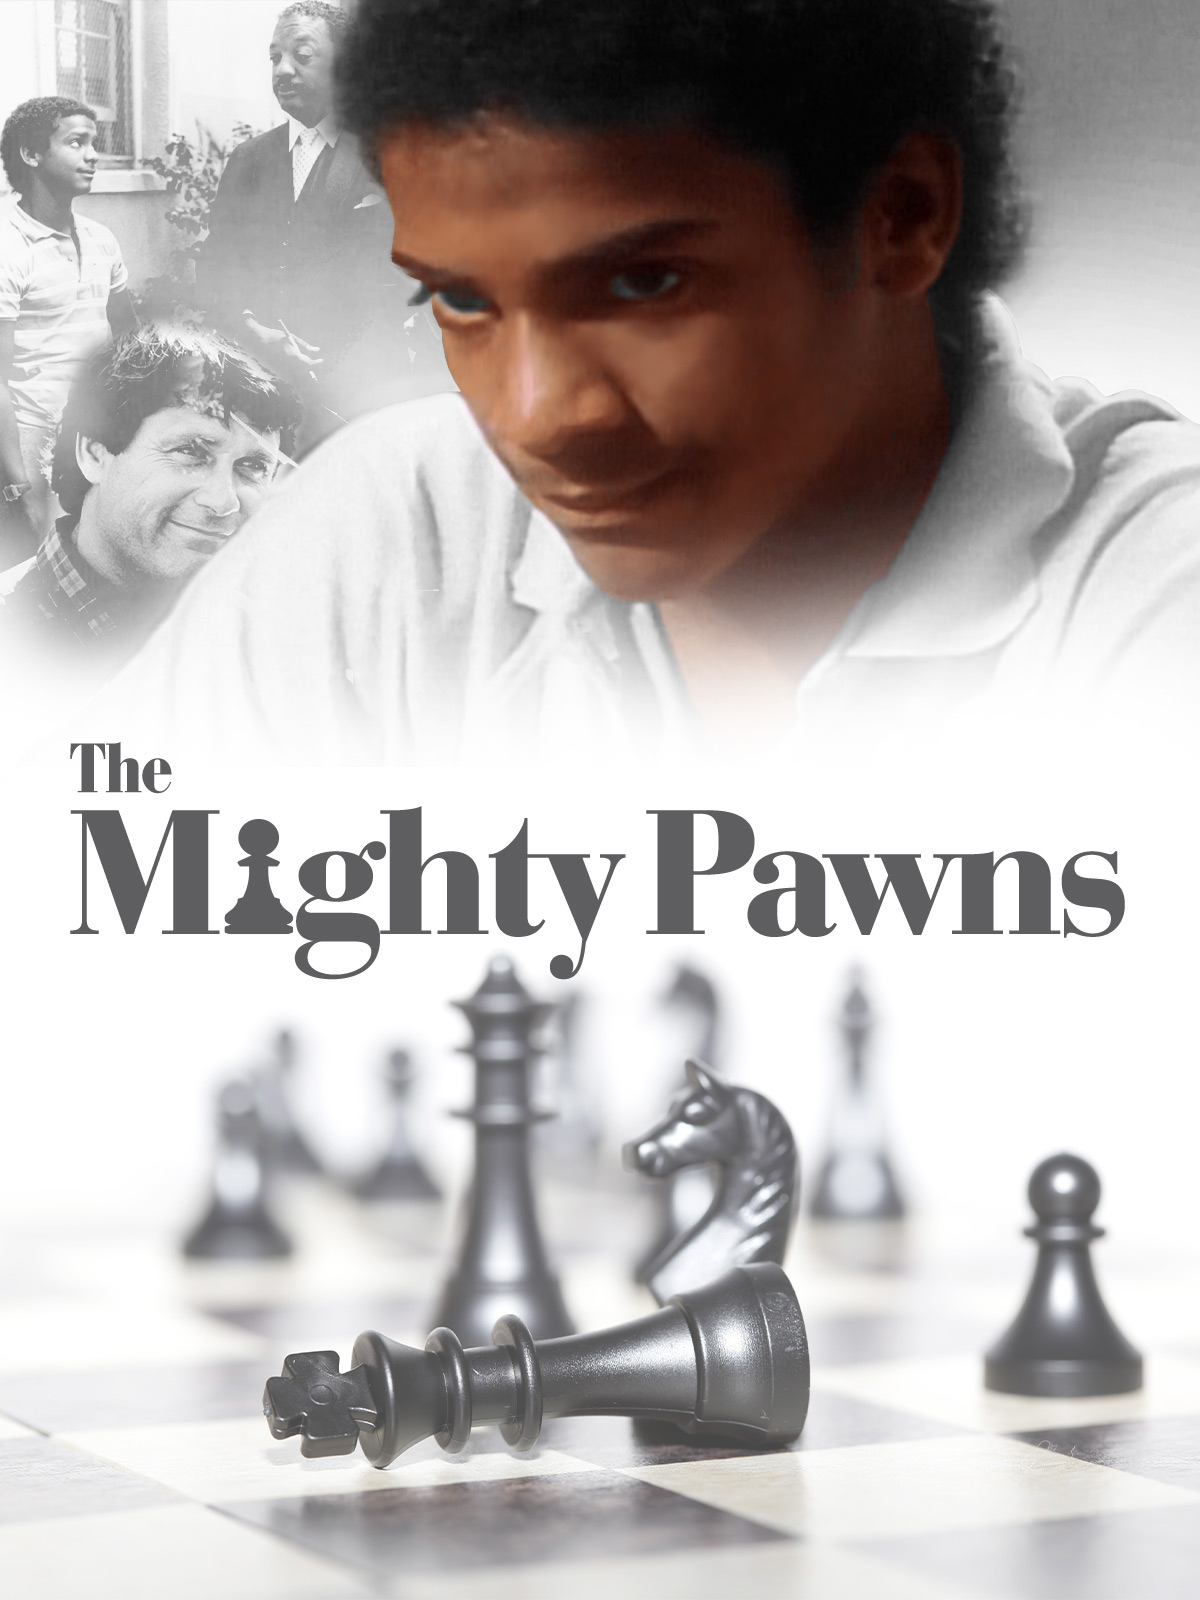 The Mighty Pawns (1987) Screenshot 3